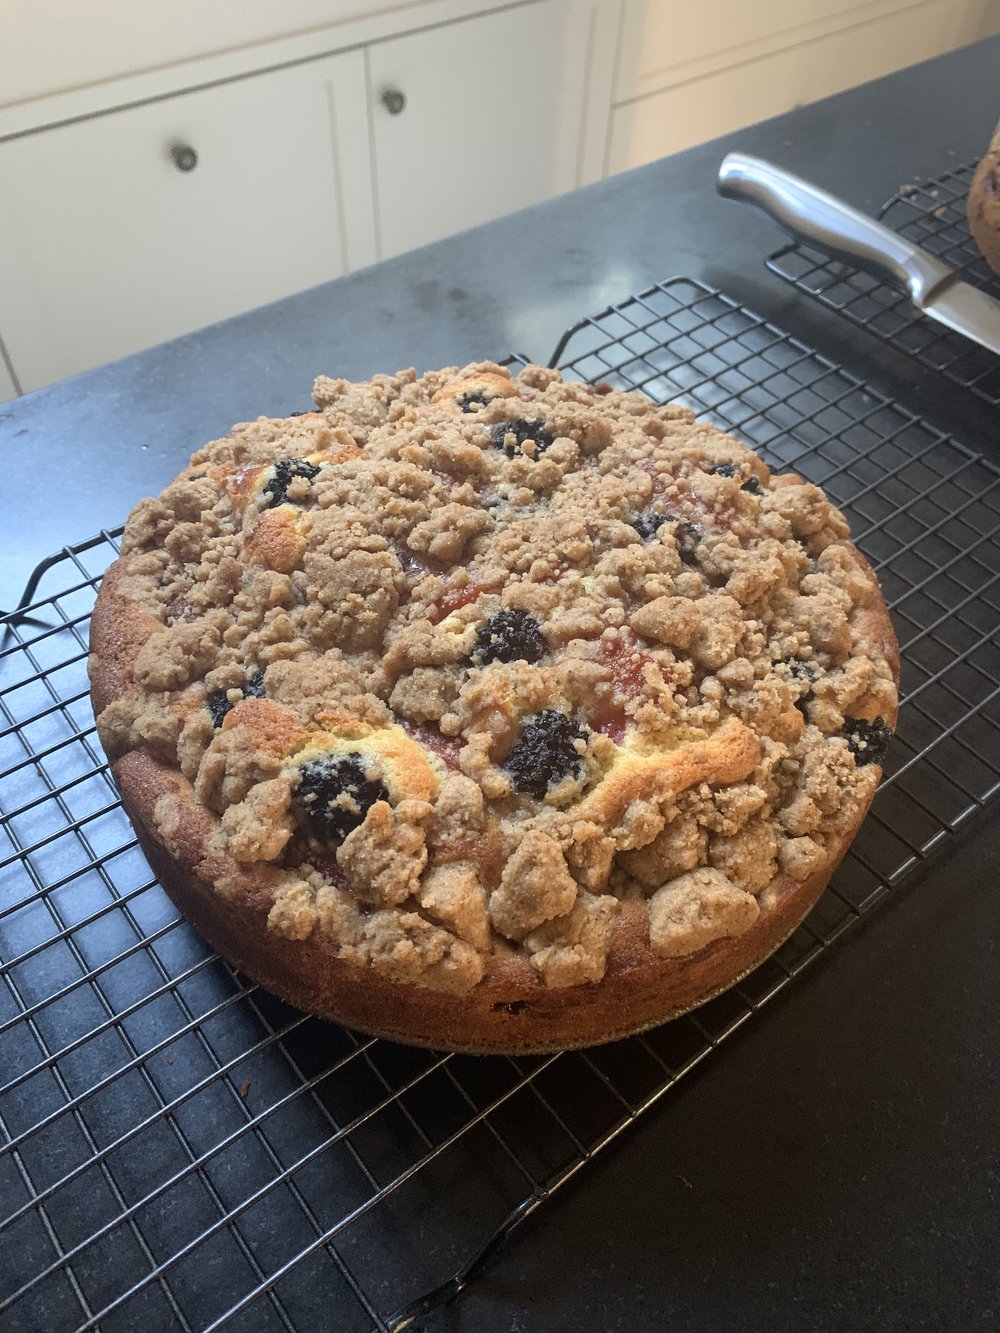 Quince and Blackberry Crumble Cake